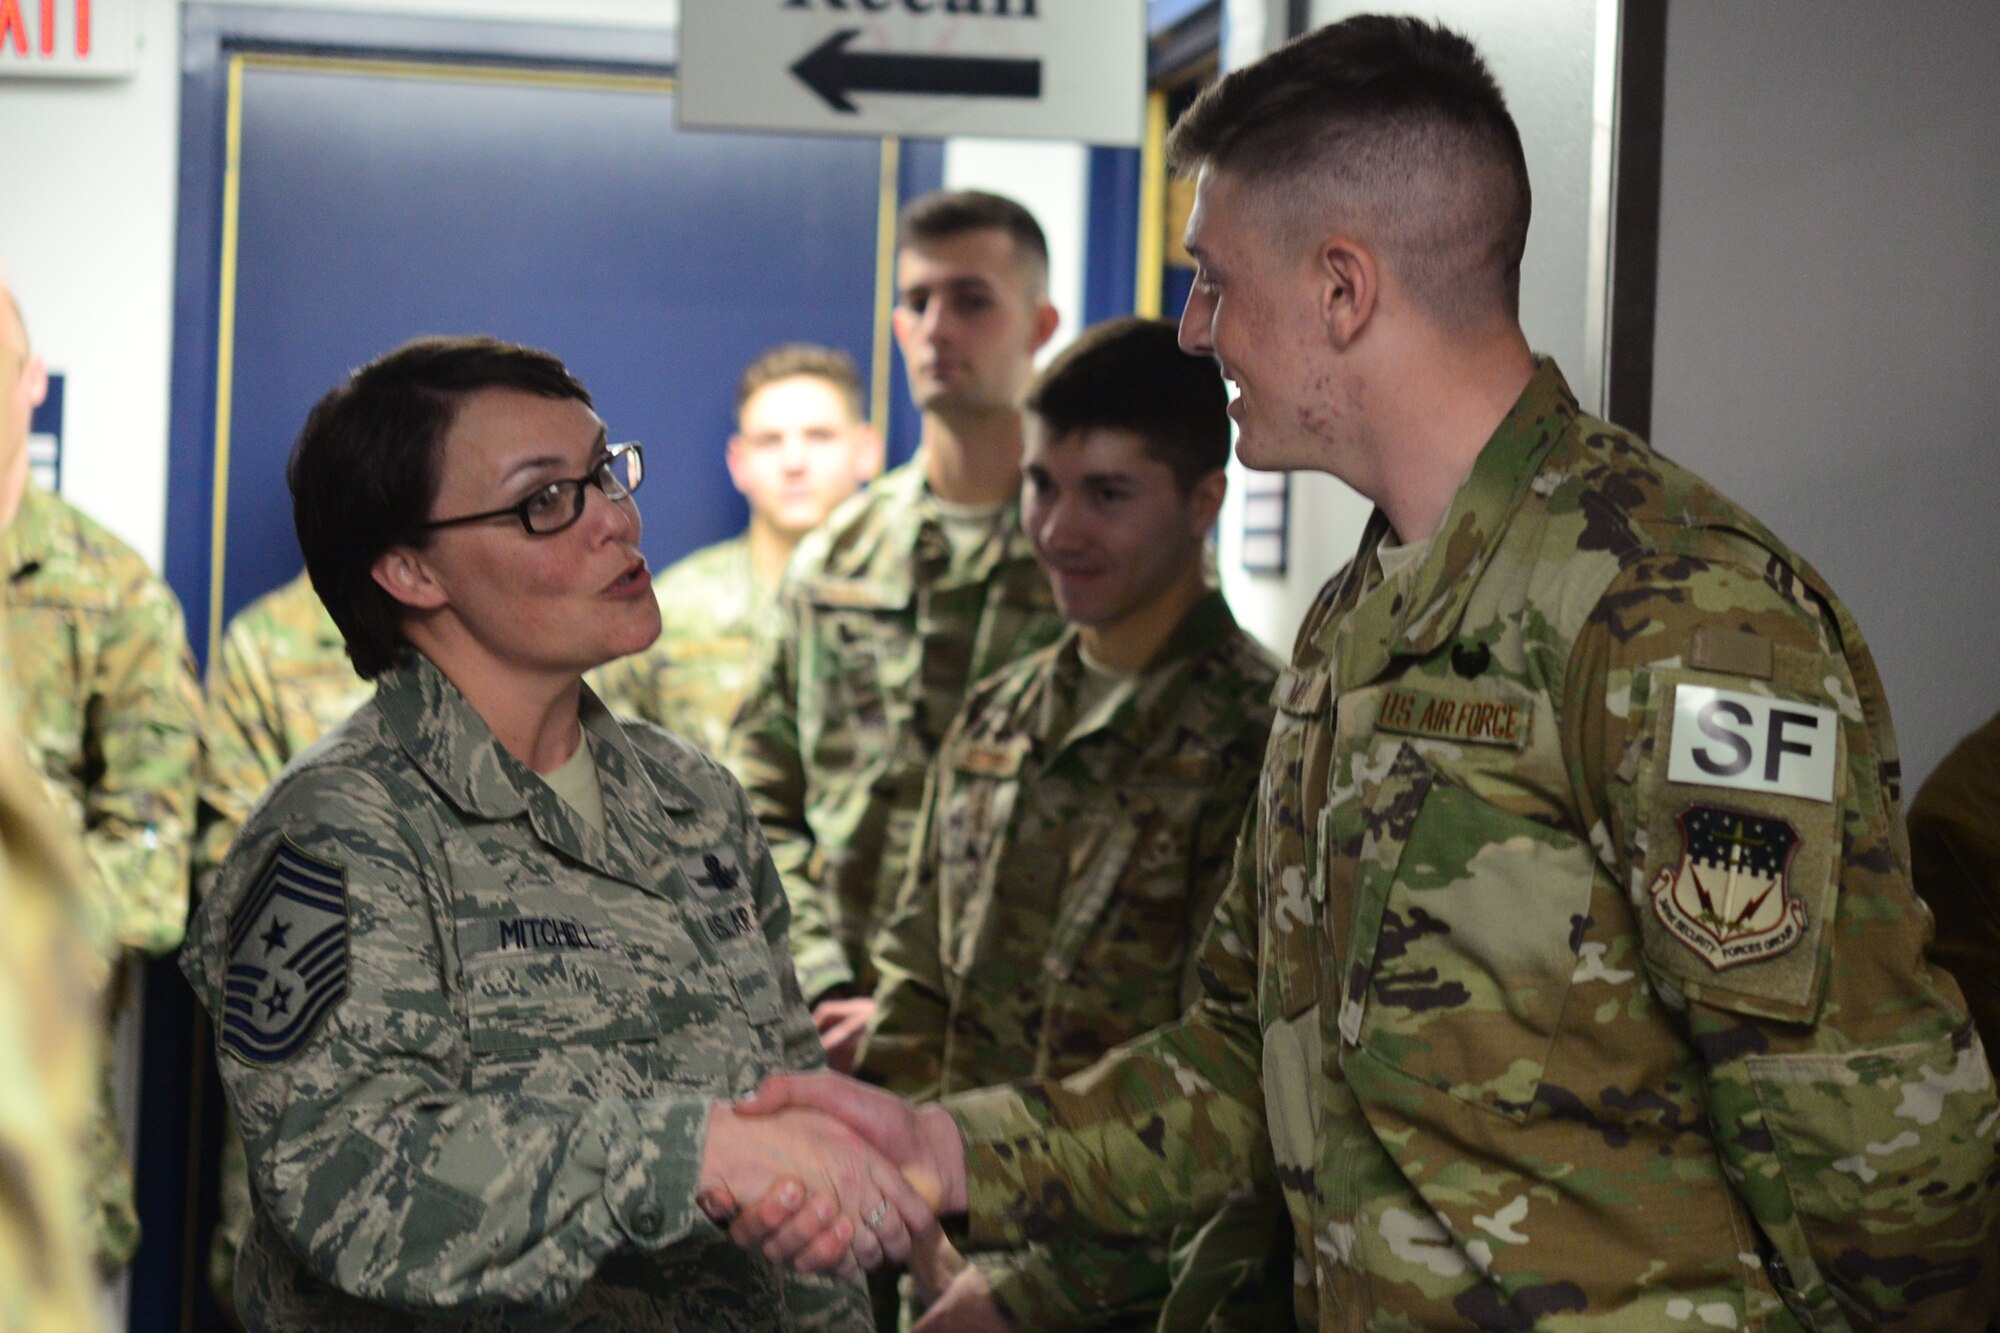 Chief Master Sgt. Amber Mitchell, 341st Missile Wing command chief, left, presents a coin to Airman Gideon Magrini, 841st Missile Security Forces Squadron missile security operator, Mar. 23, 2018, at Malmstrom Air Force Base, Mont.